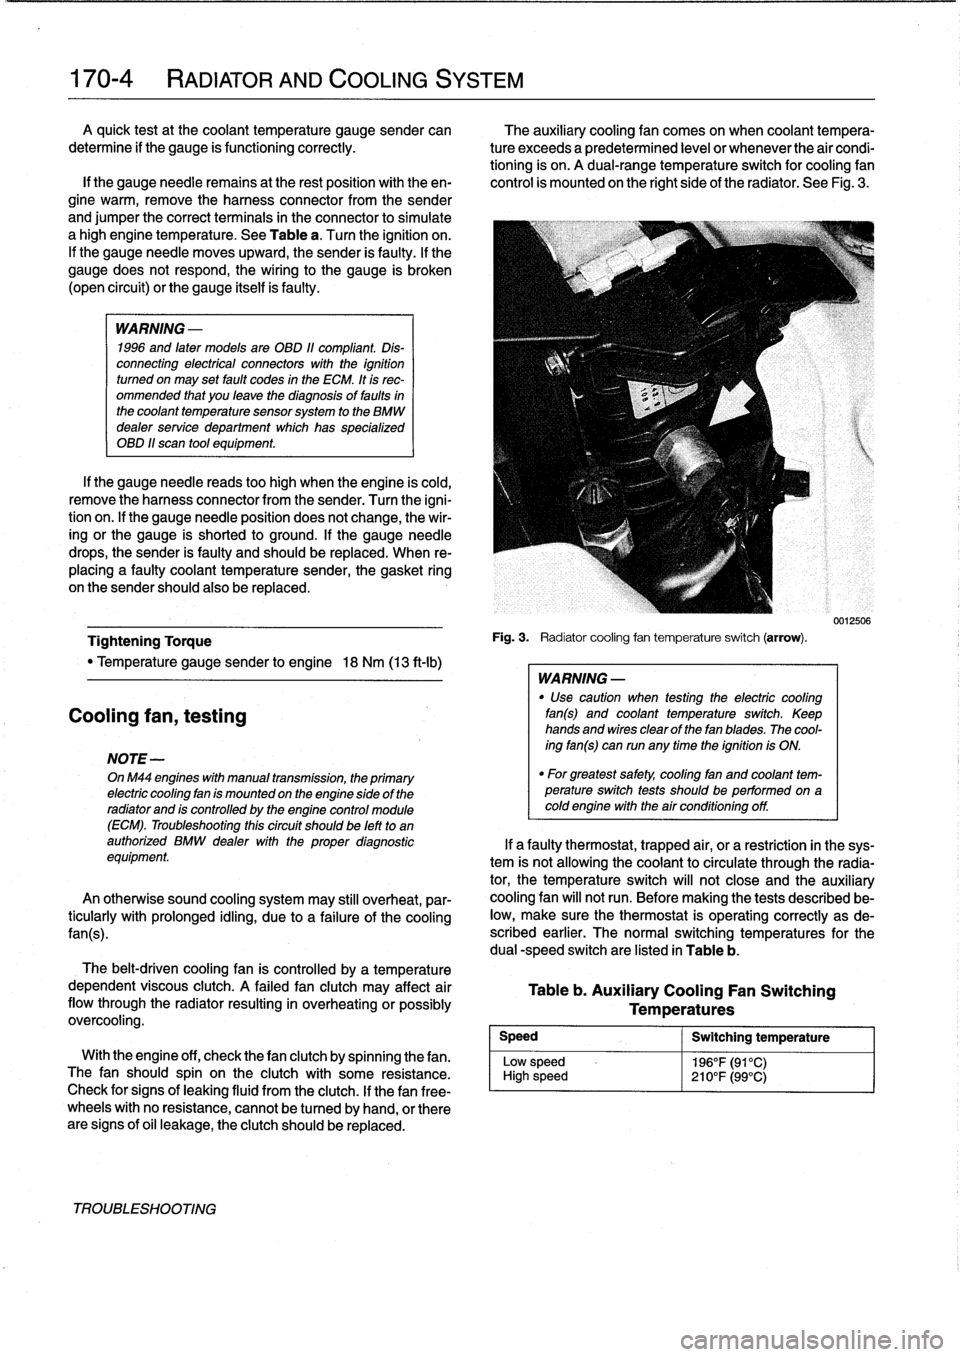 BMW 325i 1993 E36 Service Manual 
170-
4

	

RADIATOR
AND
COOLING
SYSTEM
A
quick
testat
the
coolant
temperature
gauge
sender
can

	

The
auxiliary
cooling
fan
comes
on
when
coolant
tempera

determine
if
the
gauge
is
functioning
corre